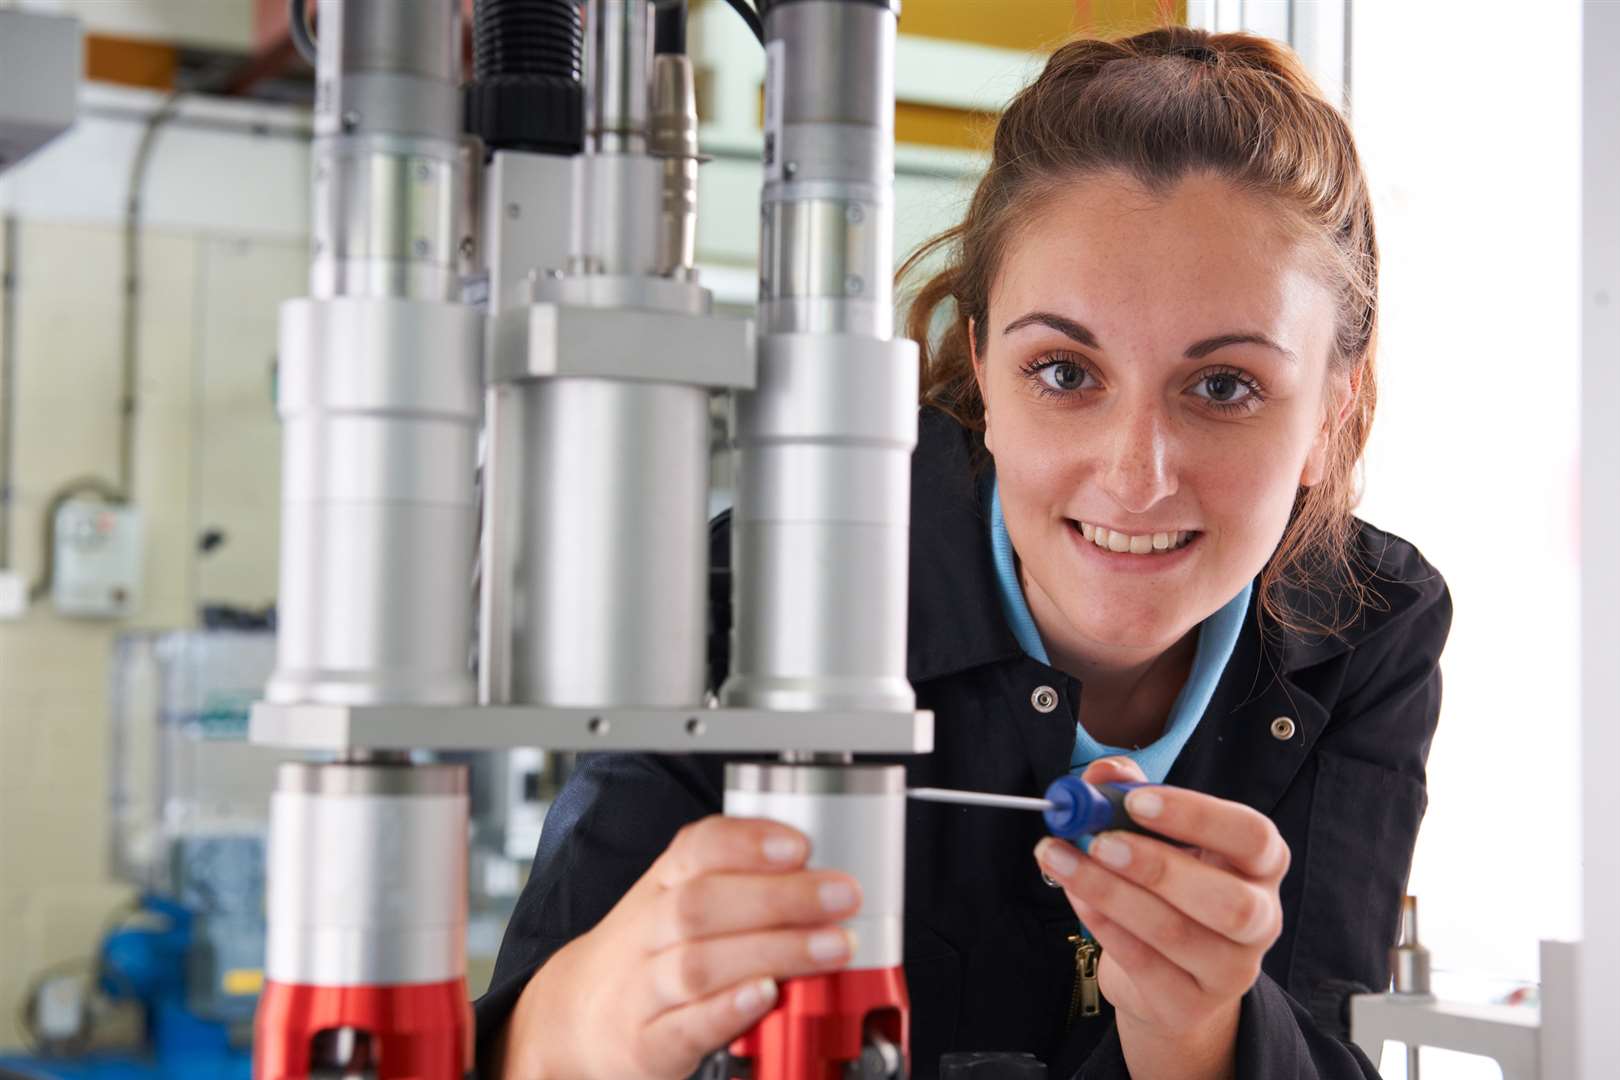 A young engineering apprentice